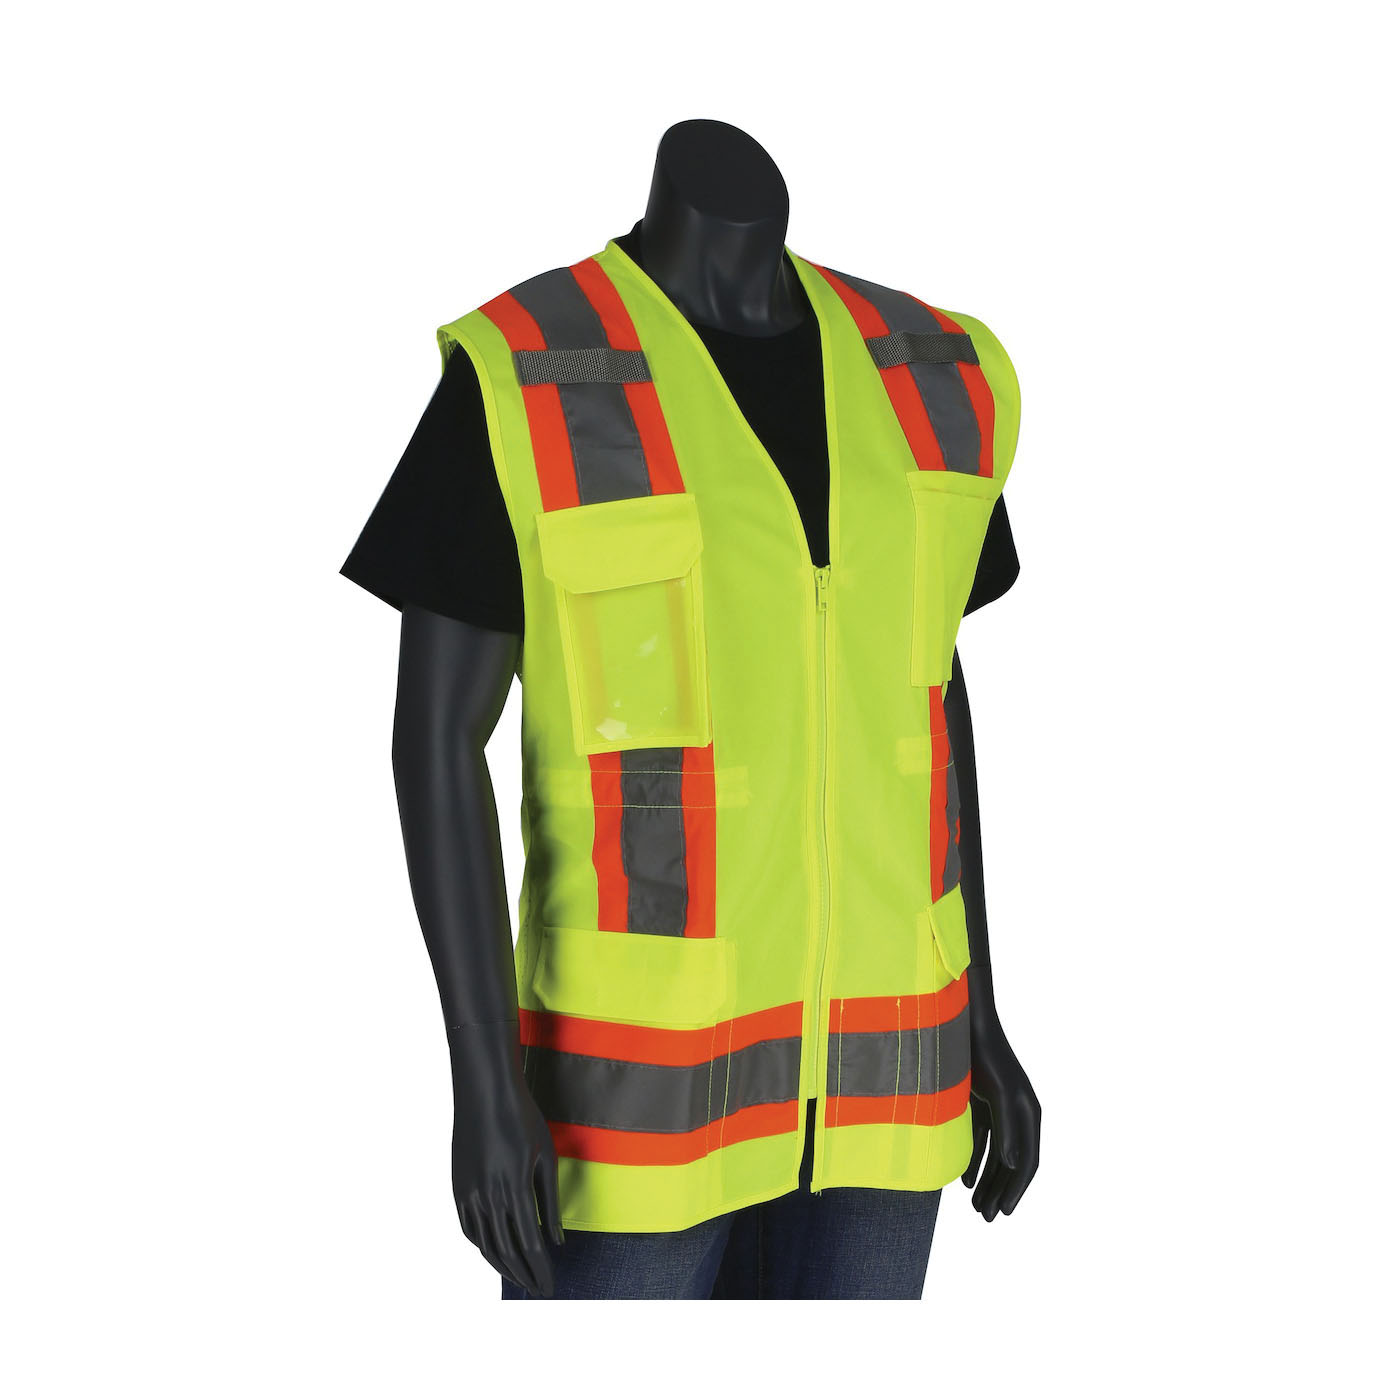 PIP® 302-0512-LY/XL 2-Tone Contoured Surveyor's Vest With Solid Front and Mesh Back, XL, Hi-Vis Yellow, 100% Polyester Mesh/Solid Tricot Knit, Zipper Closure, 11 Pockets, ANSI Class: Type/Class R2